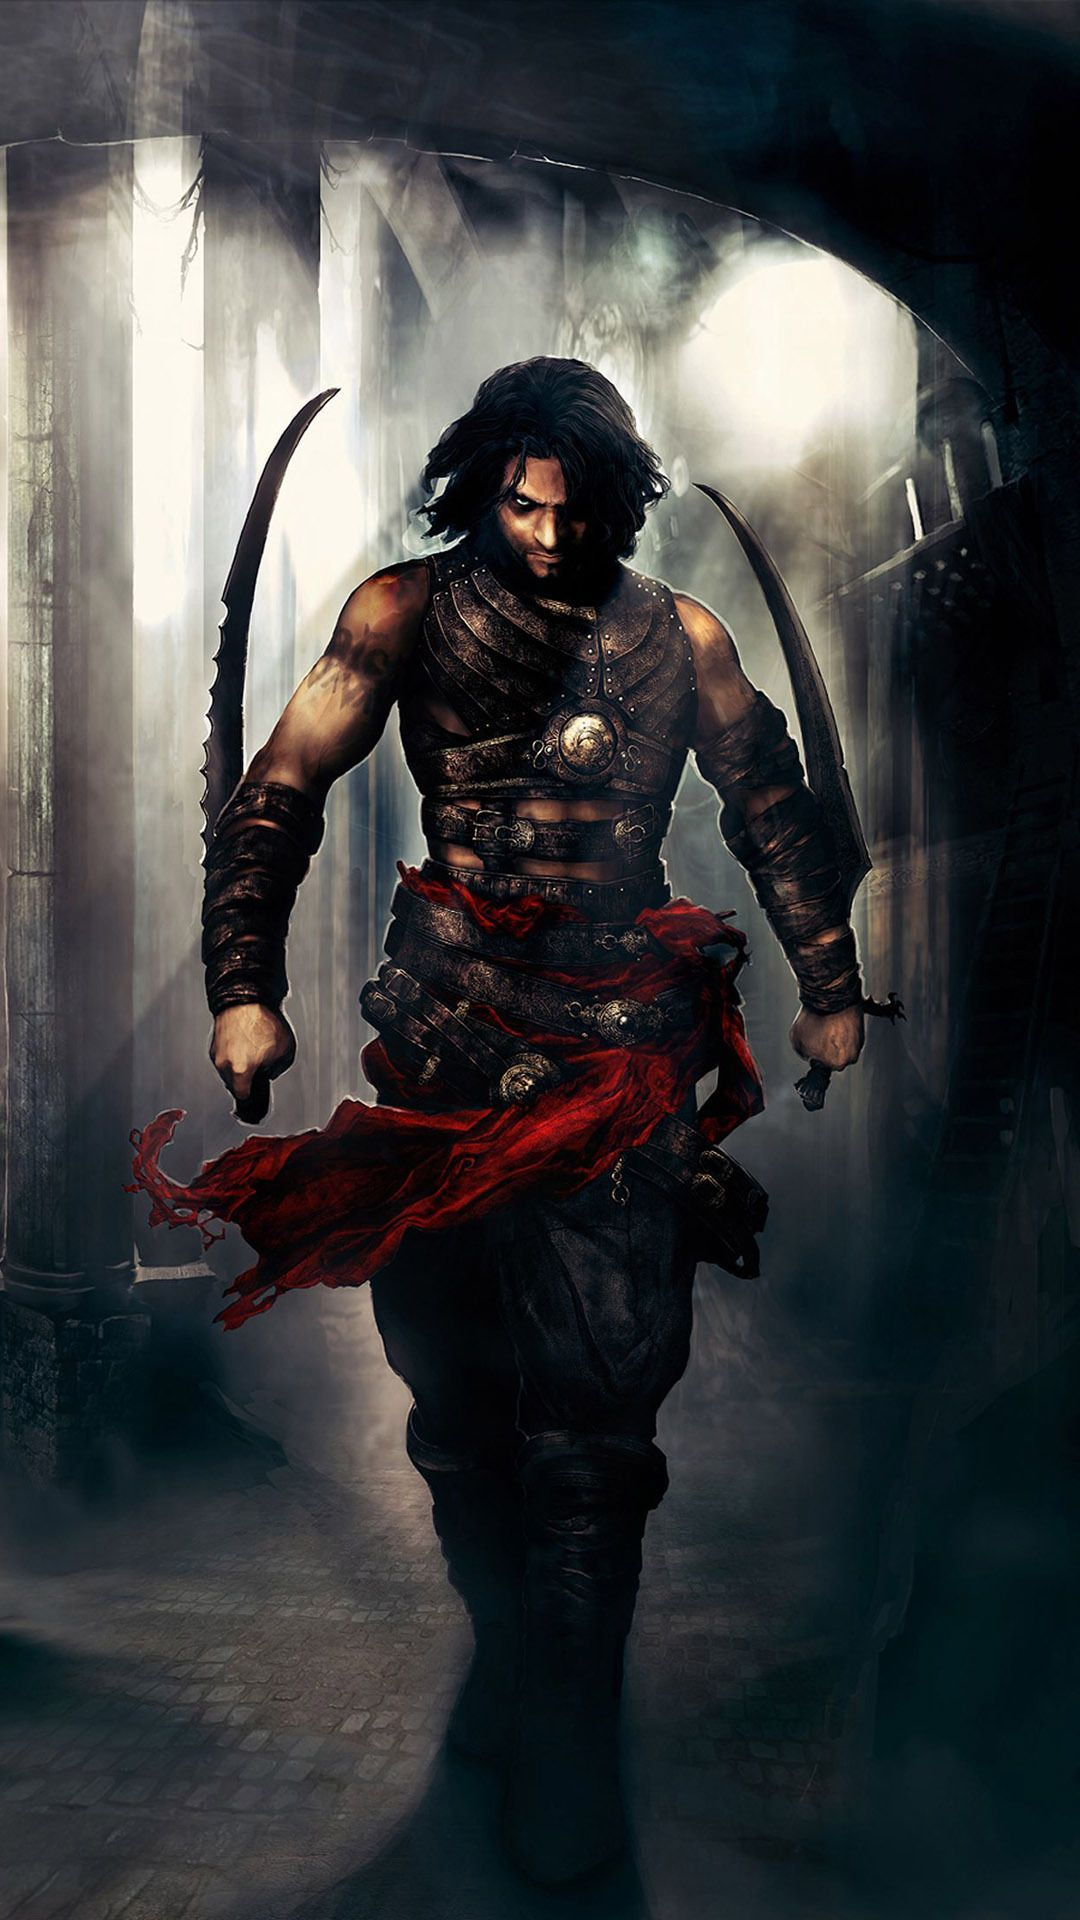 1080x1920 Prince of Persia iPhone Wallpapers Top Free Prince of Persia iPhone Backgrounds